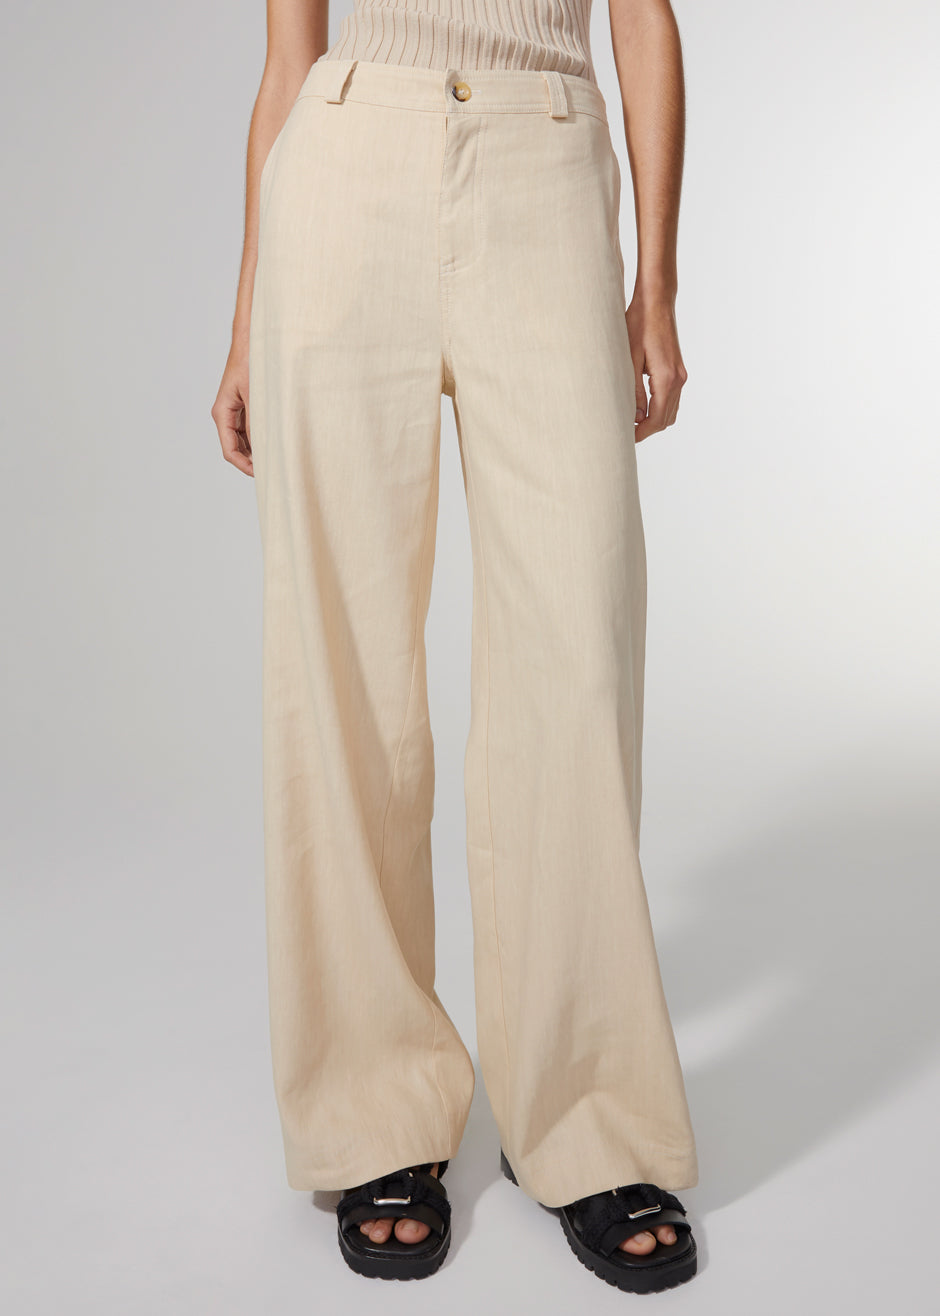 Rodebjer Annie Pants - Warm Sand - 2